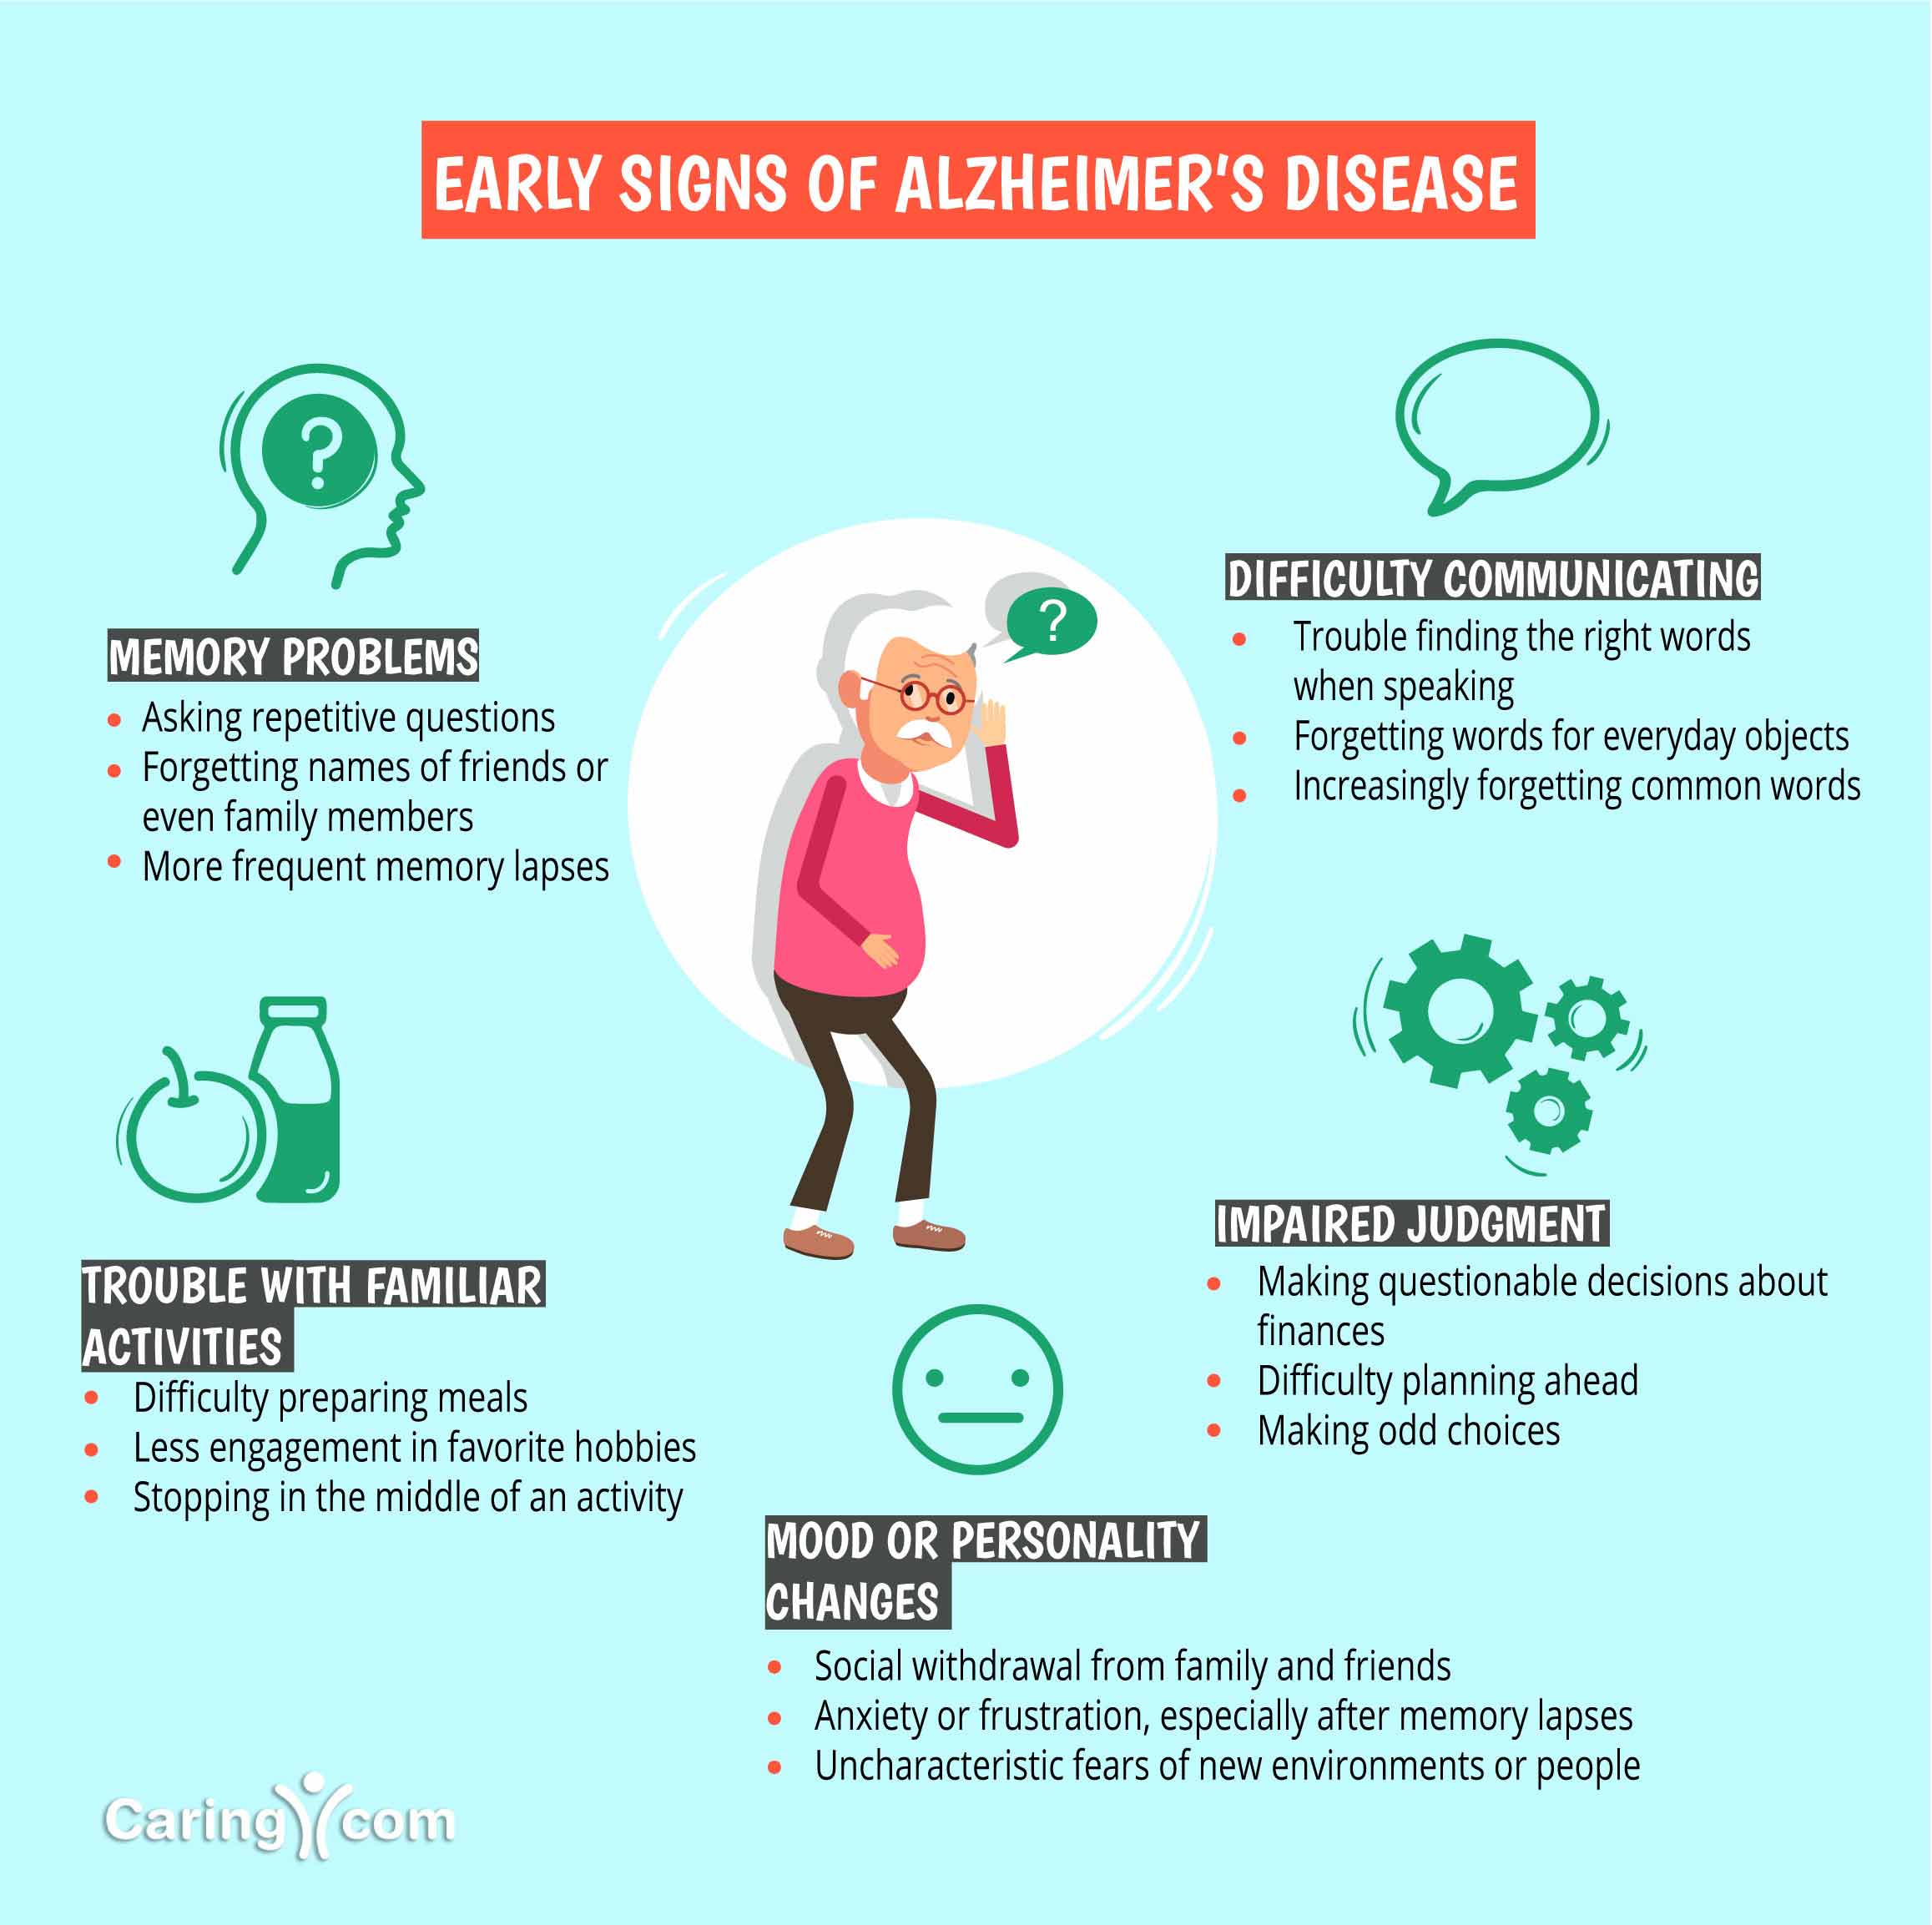 What Is The First Symptoms Of Alzheimer